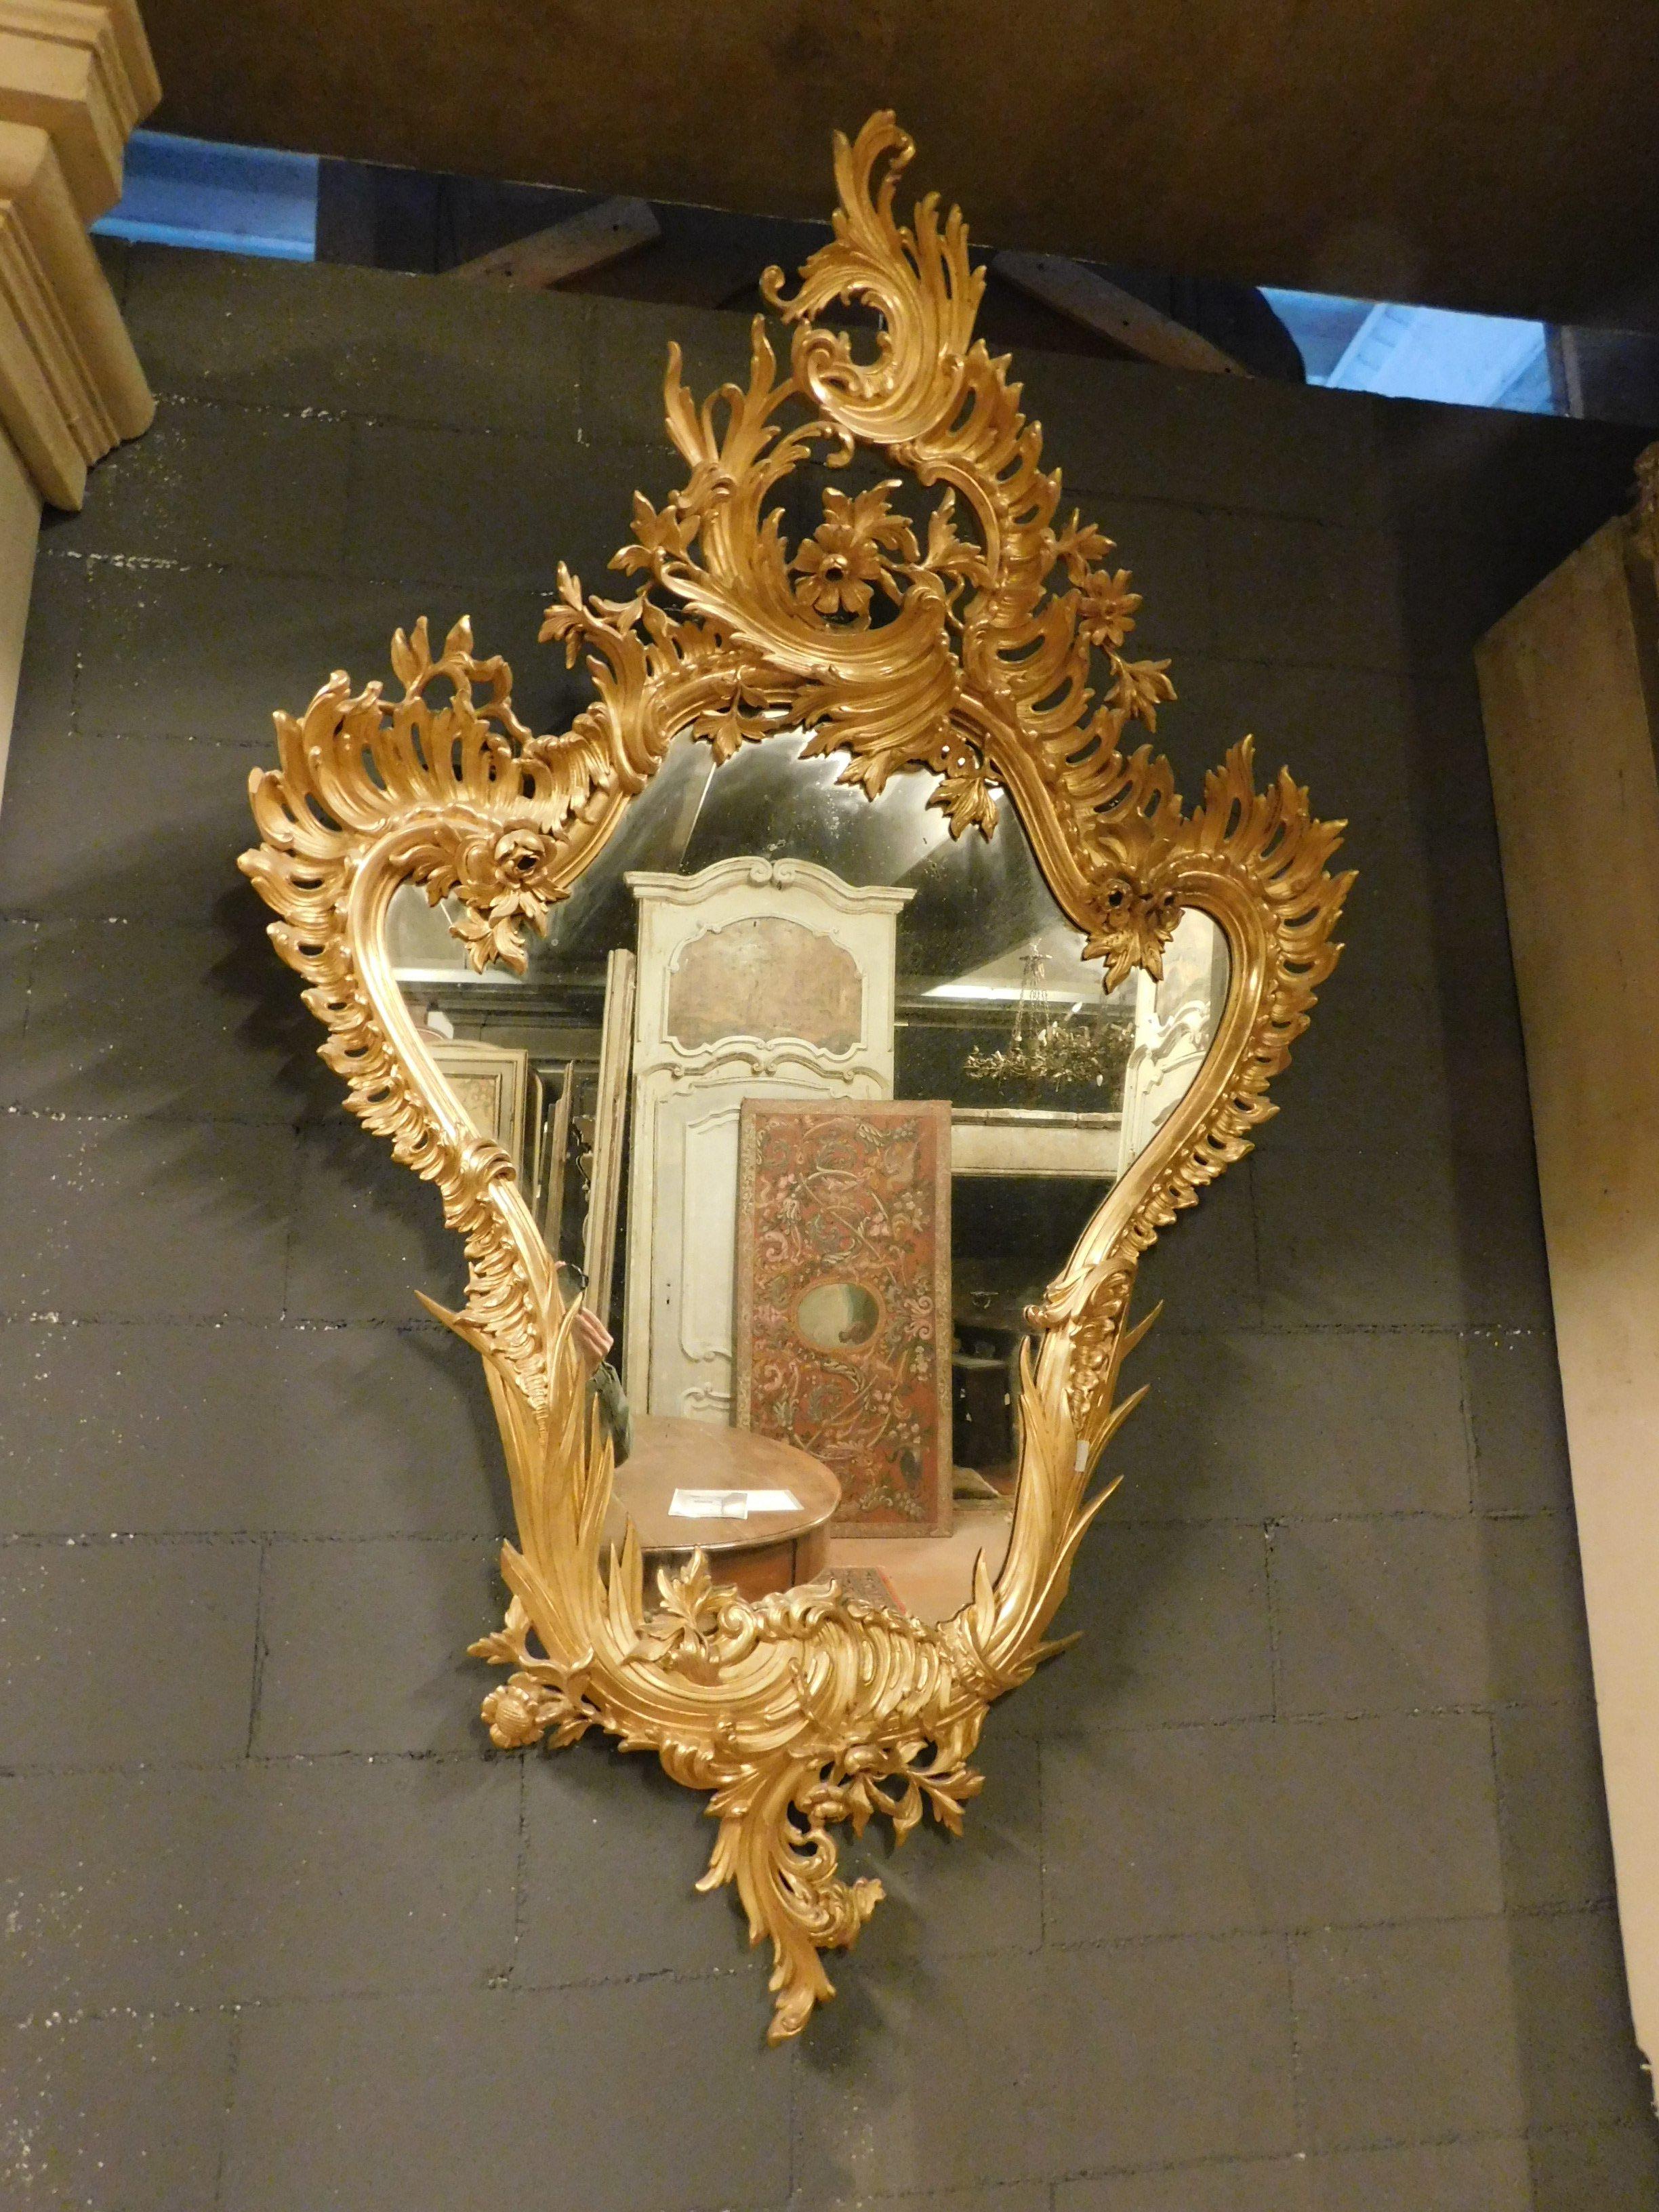 Vintage, antique wooden mirror, with original gilded leaf frame, rich hand carved frame with many swirls and frills, from the Art Nouveau period, early 1900s, produced in Italy.
Ideal as an enrichment of a trendy and luxurious home, impressive,